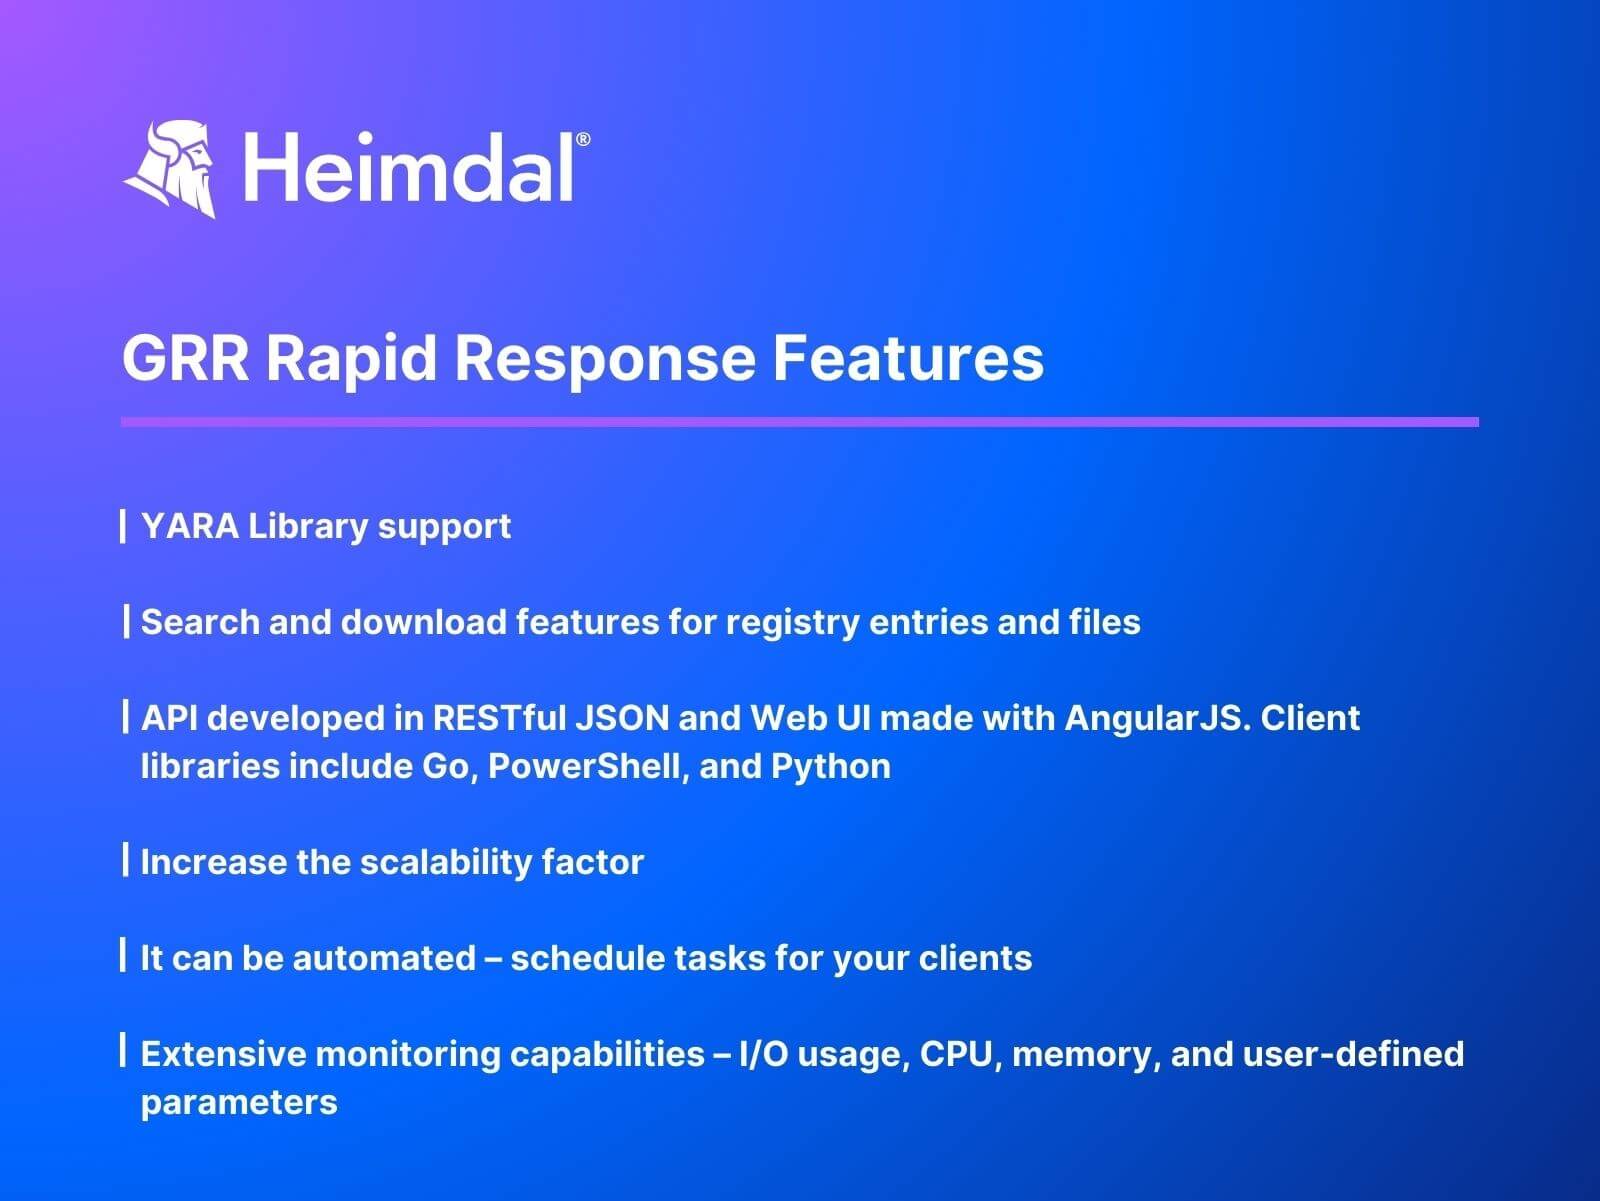 GRR Rapid Response Features